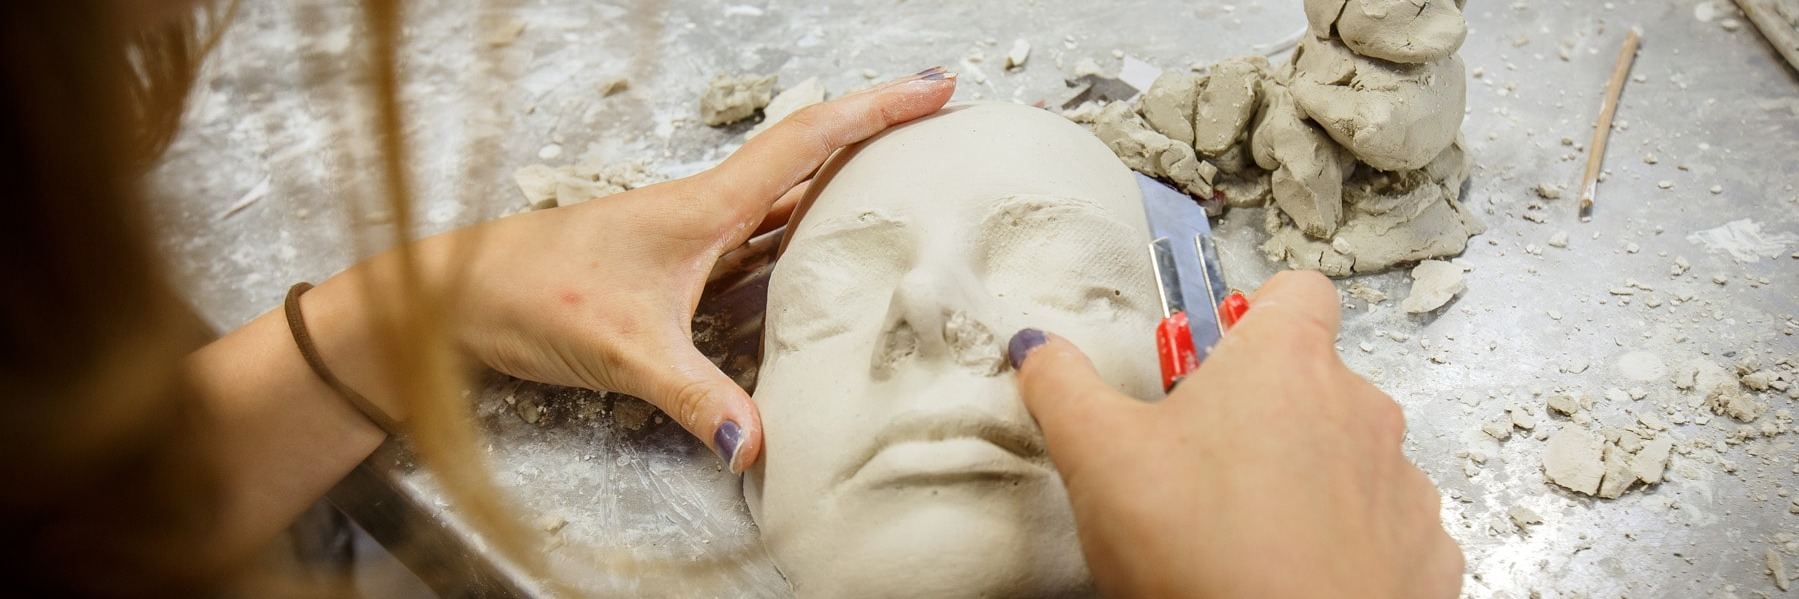 Student modelling a face out of clay material